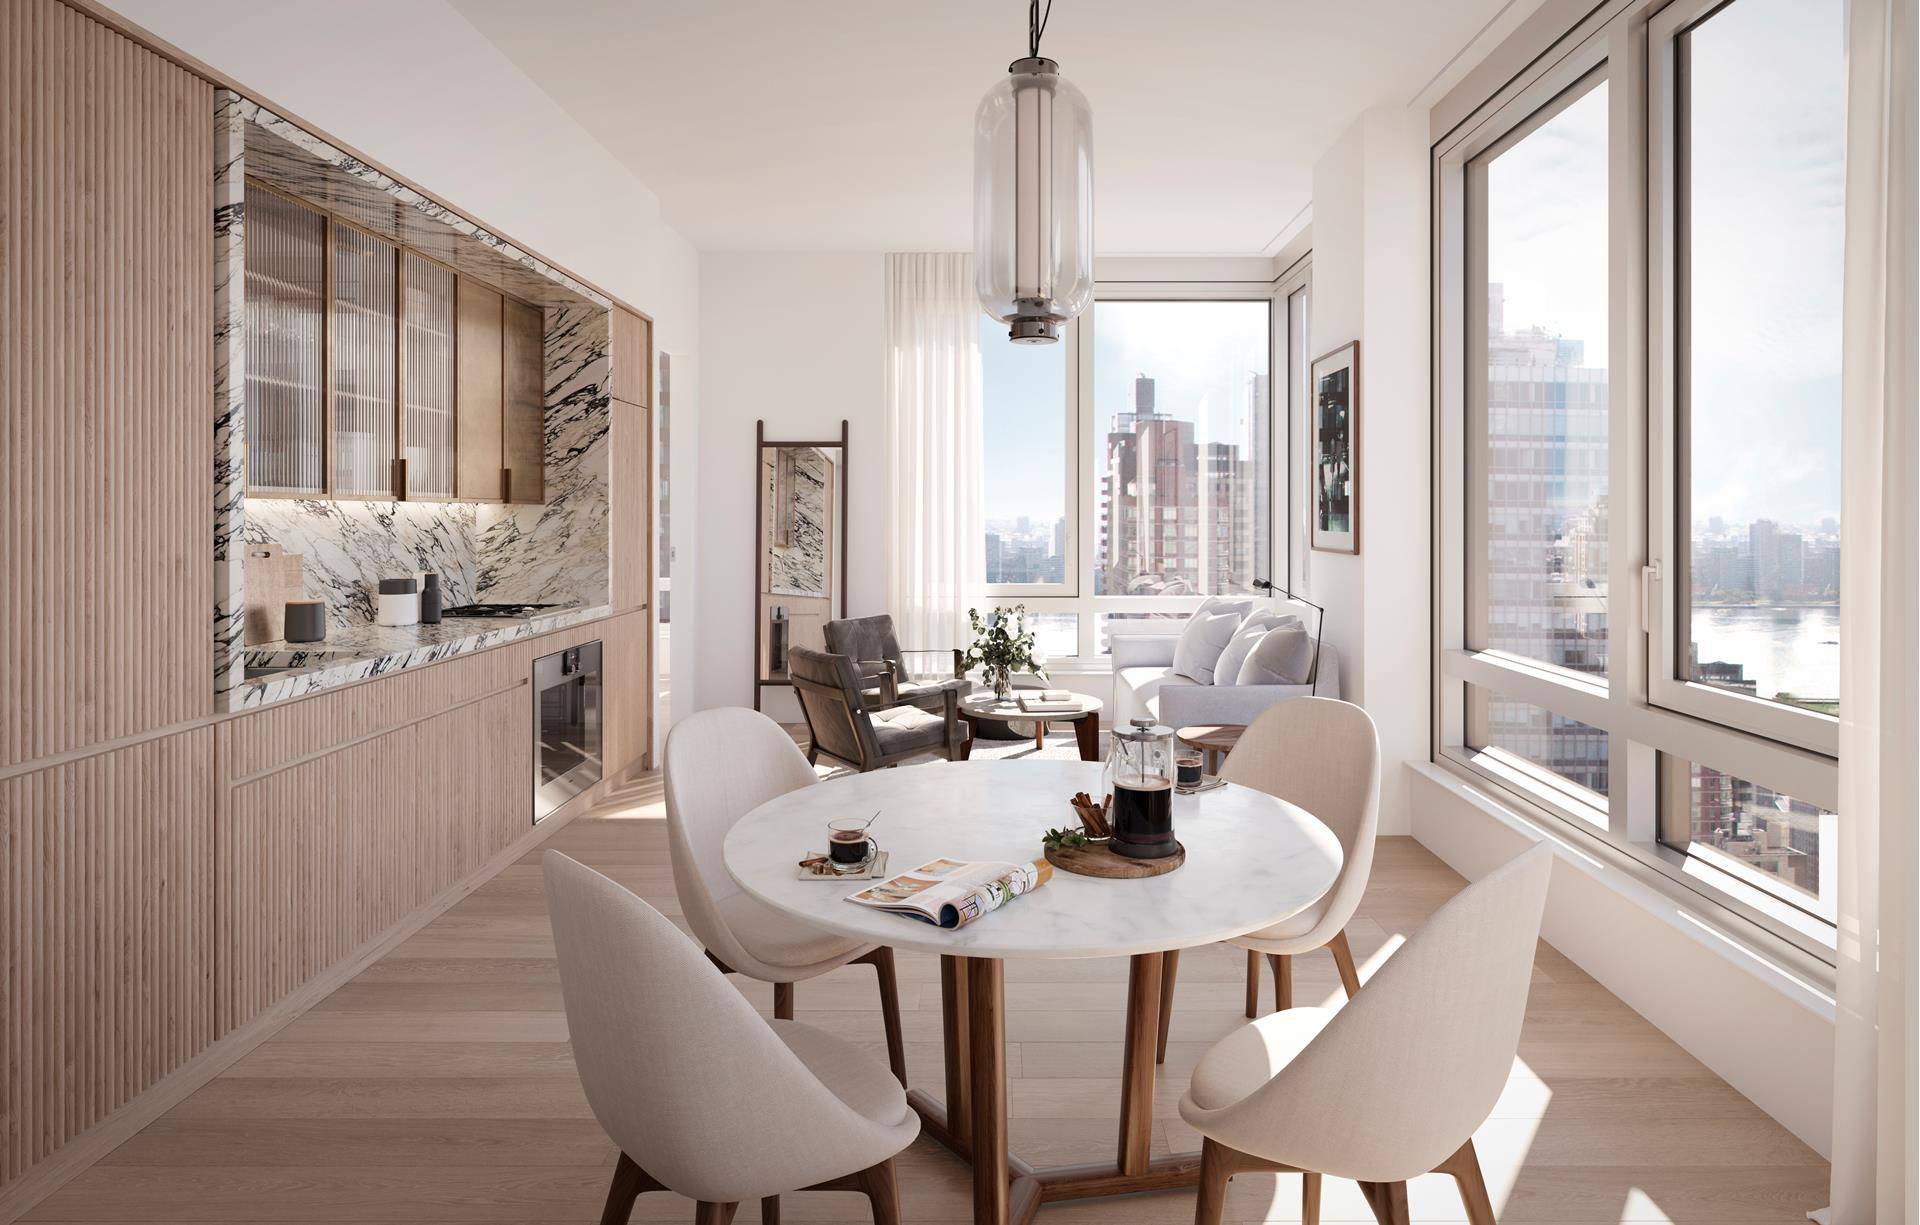 Introducing Monogram New York, Manhattan's newest collection of luxury residences nestled in the heart of the city's New Midtown at 135 East 47th Street.